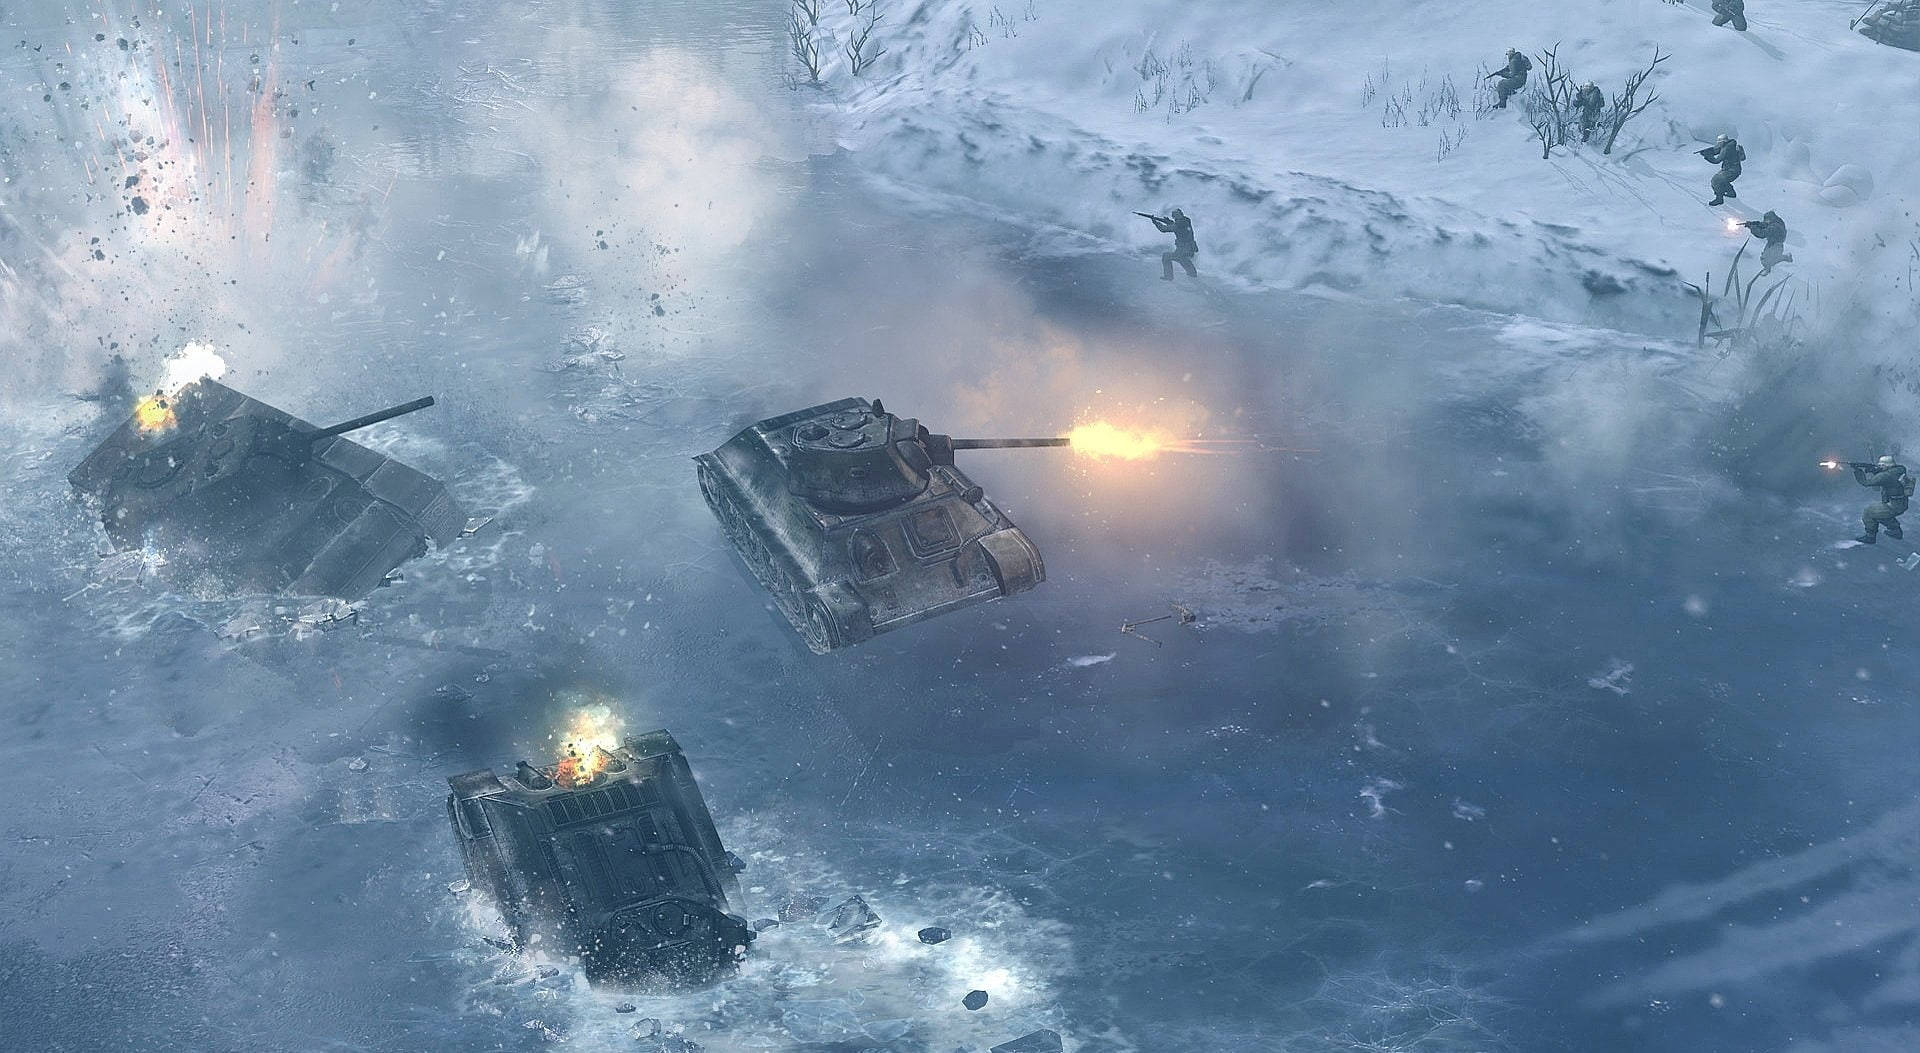 Company Of Heroes 2 Tanks On Ice Wallpaper